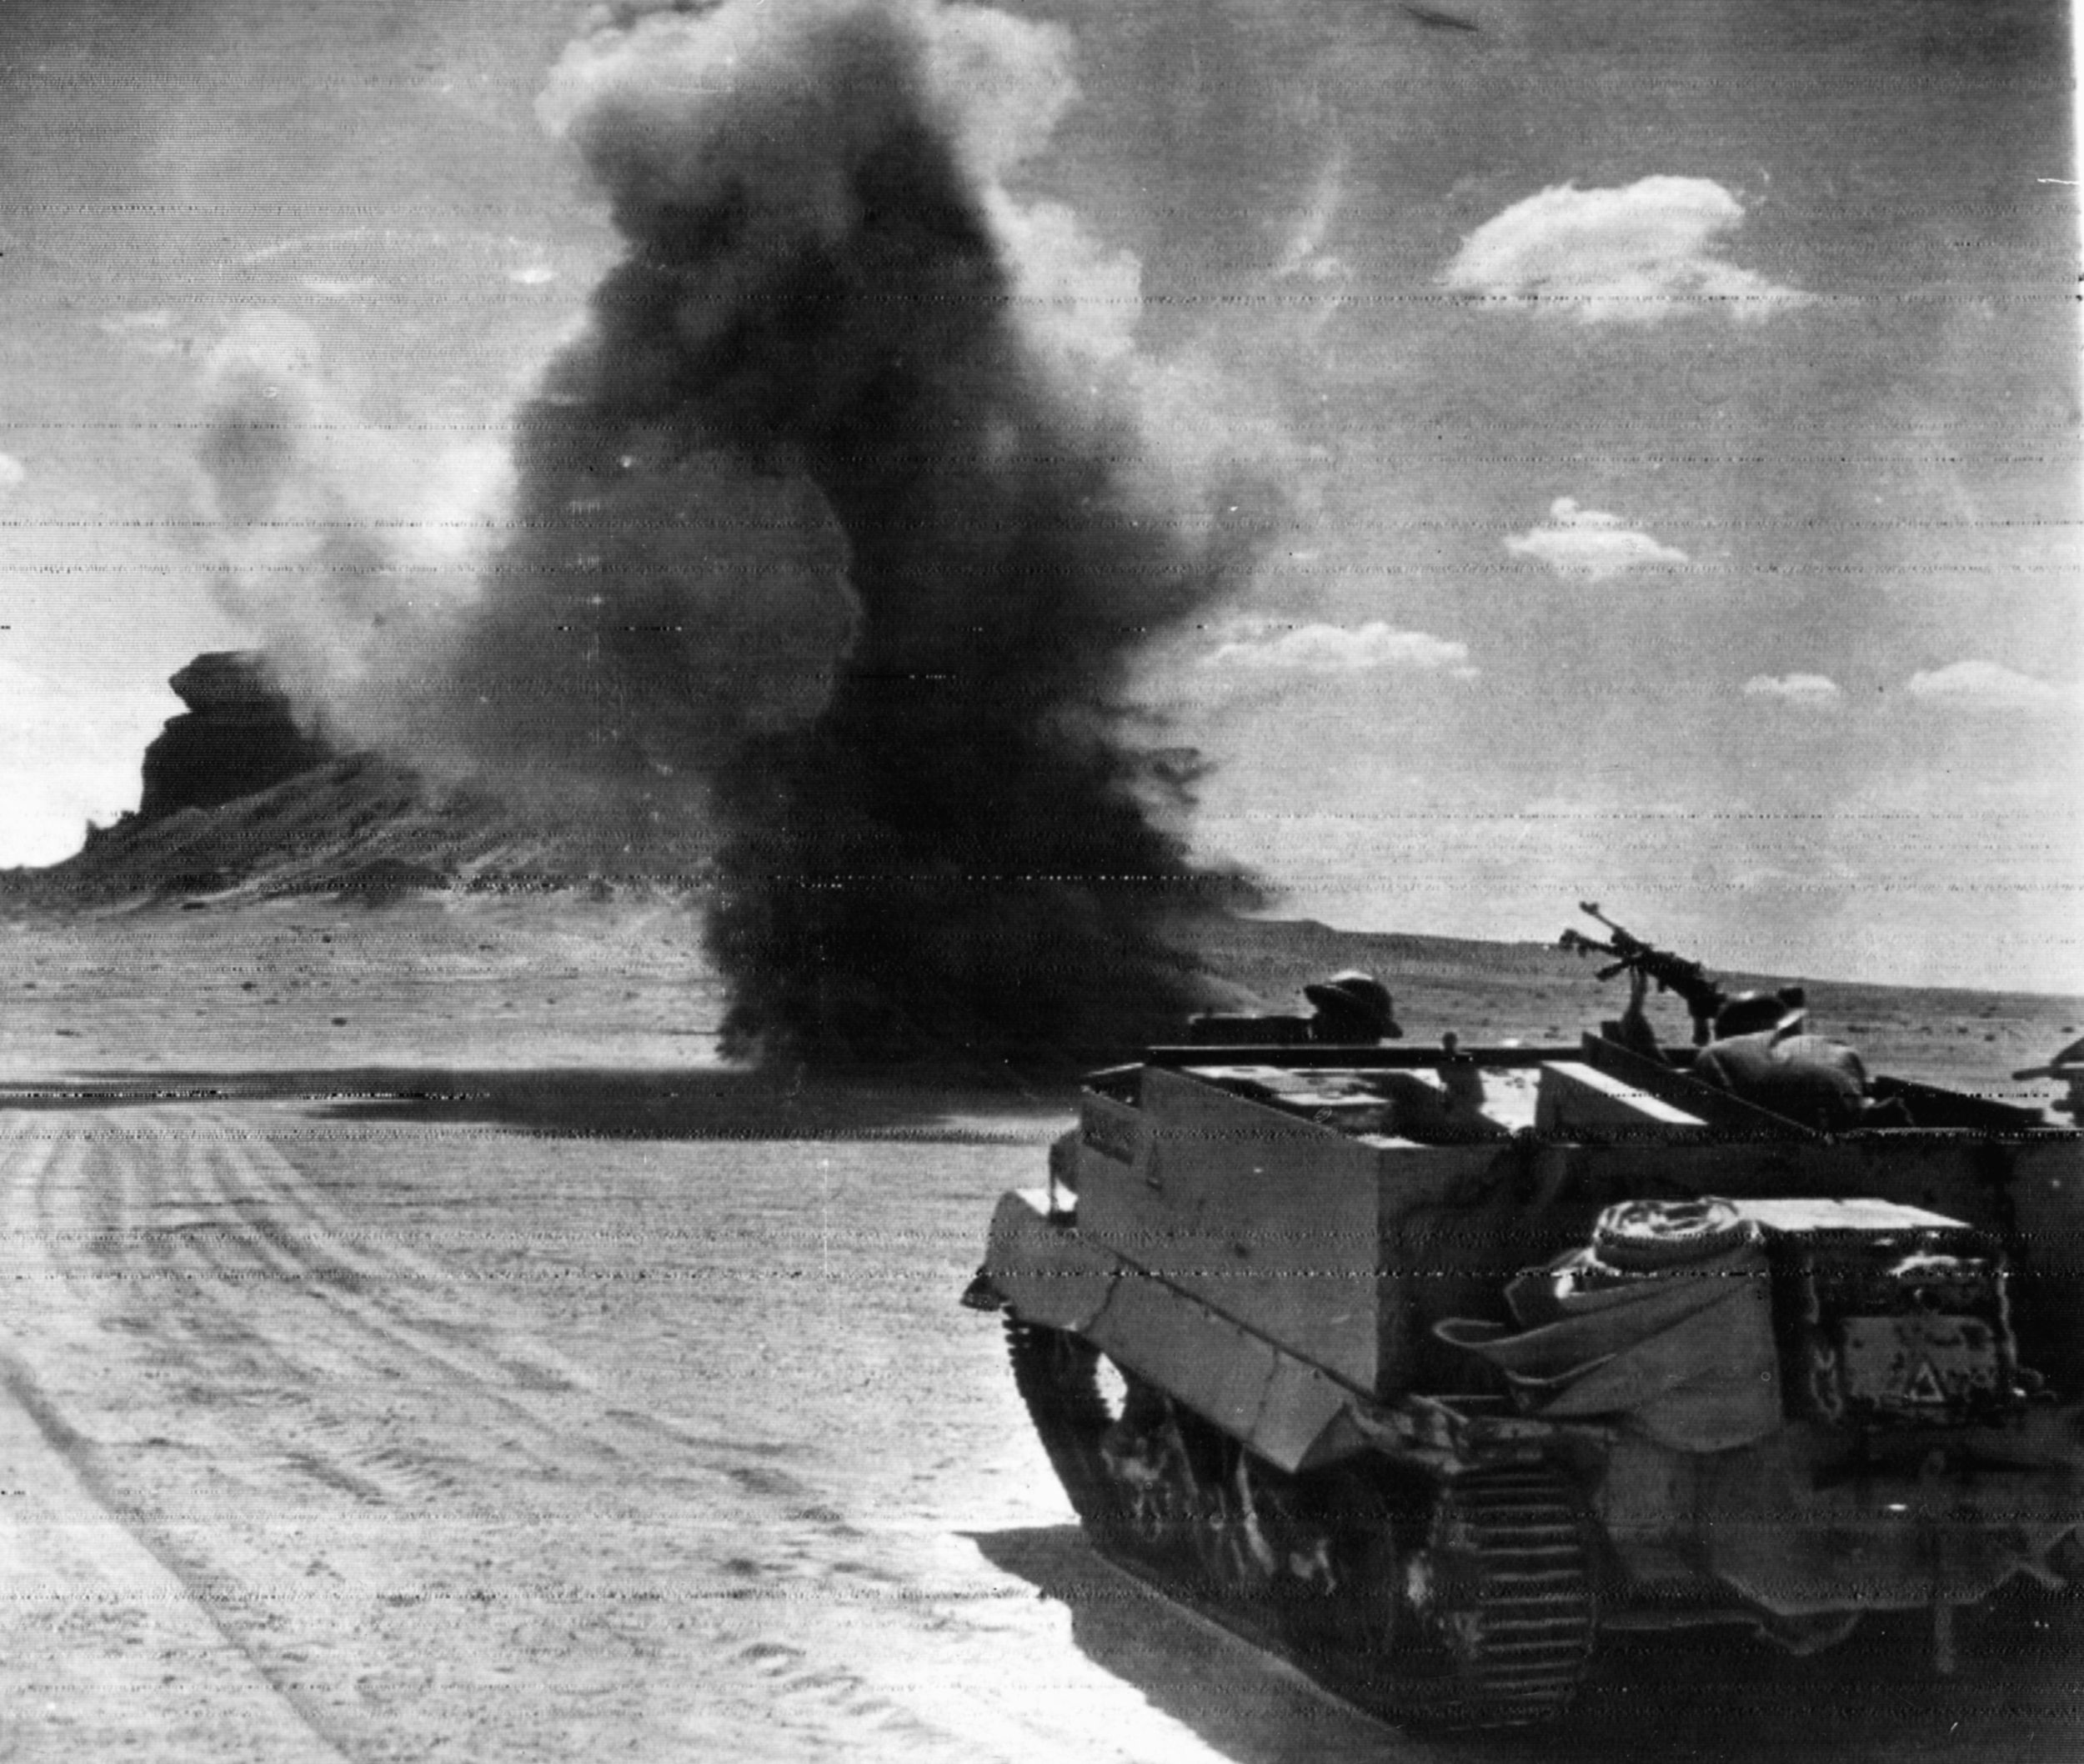 Patrolling in their Bren gun carrier, a group of British soldiers comes under fire from German artillery positioned beyond the desert horizon.